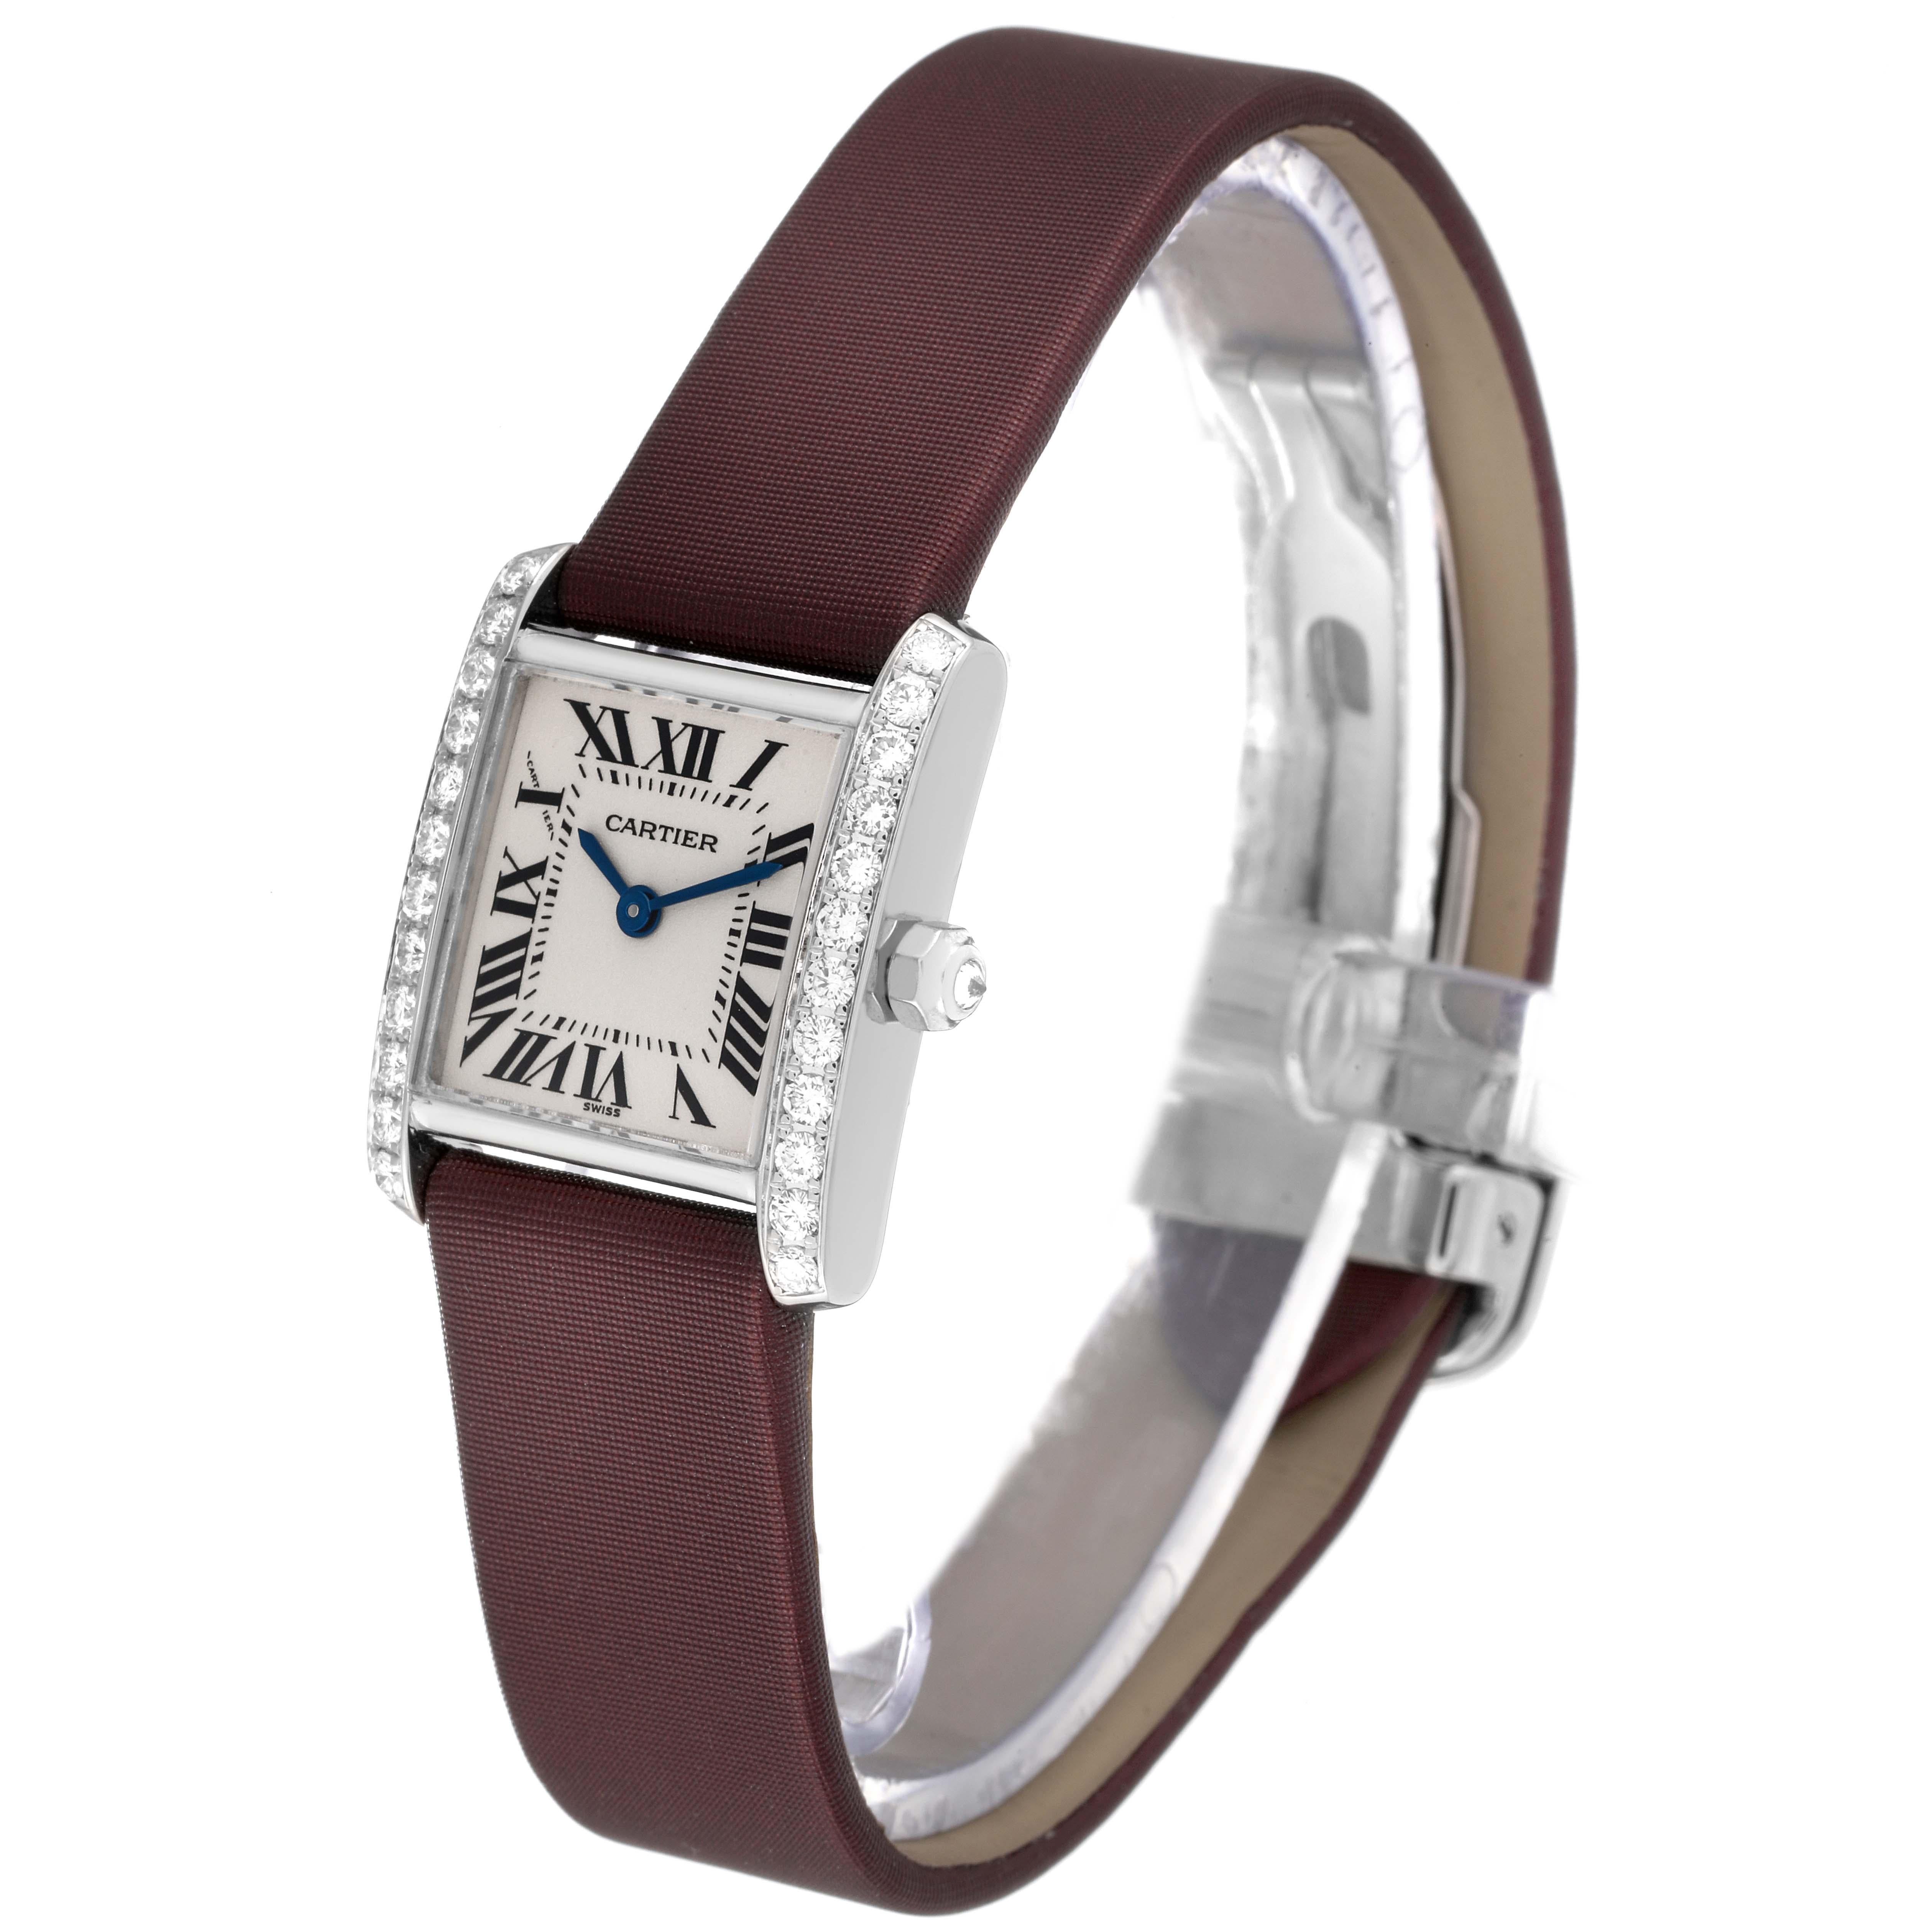 Cartier Tank Francaise White Gold Diamond Ladies Watch WE100251 In Excellent Condition For Sale In Atlanta, GA